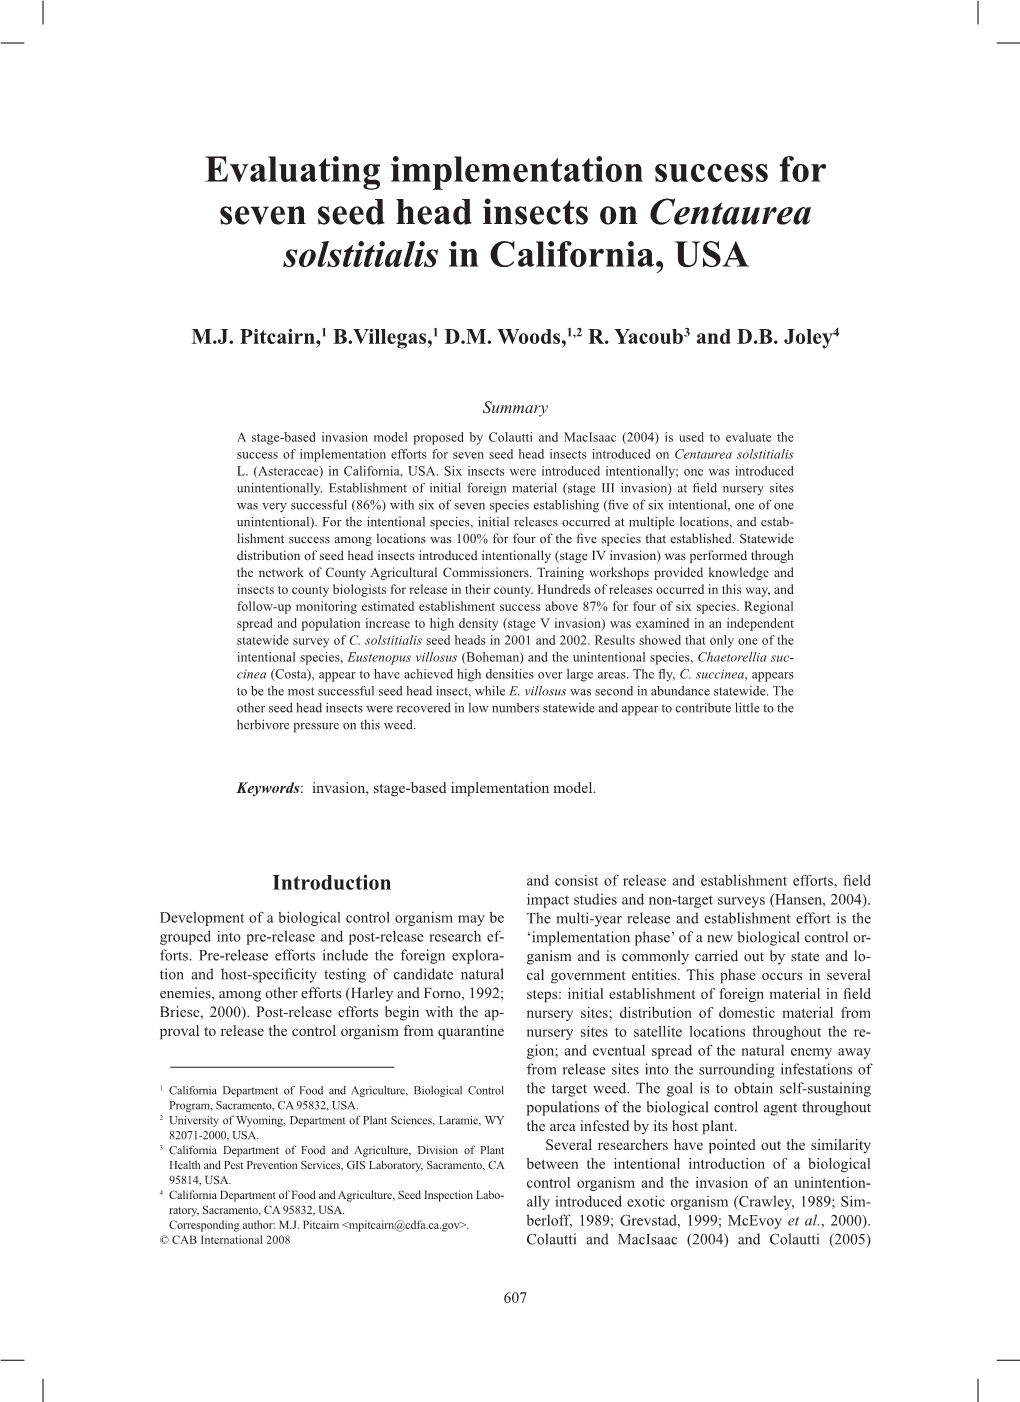 Evaluating Implementation Success for Seven Seed Head Insects on Centaurea Solstitialis in California, USA